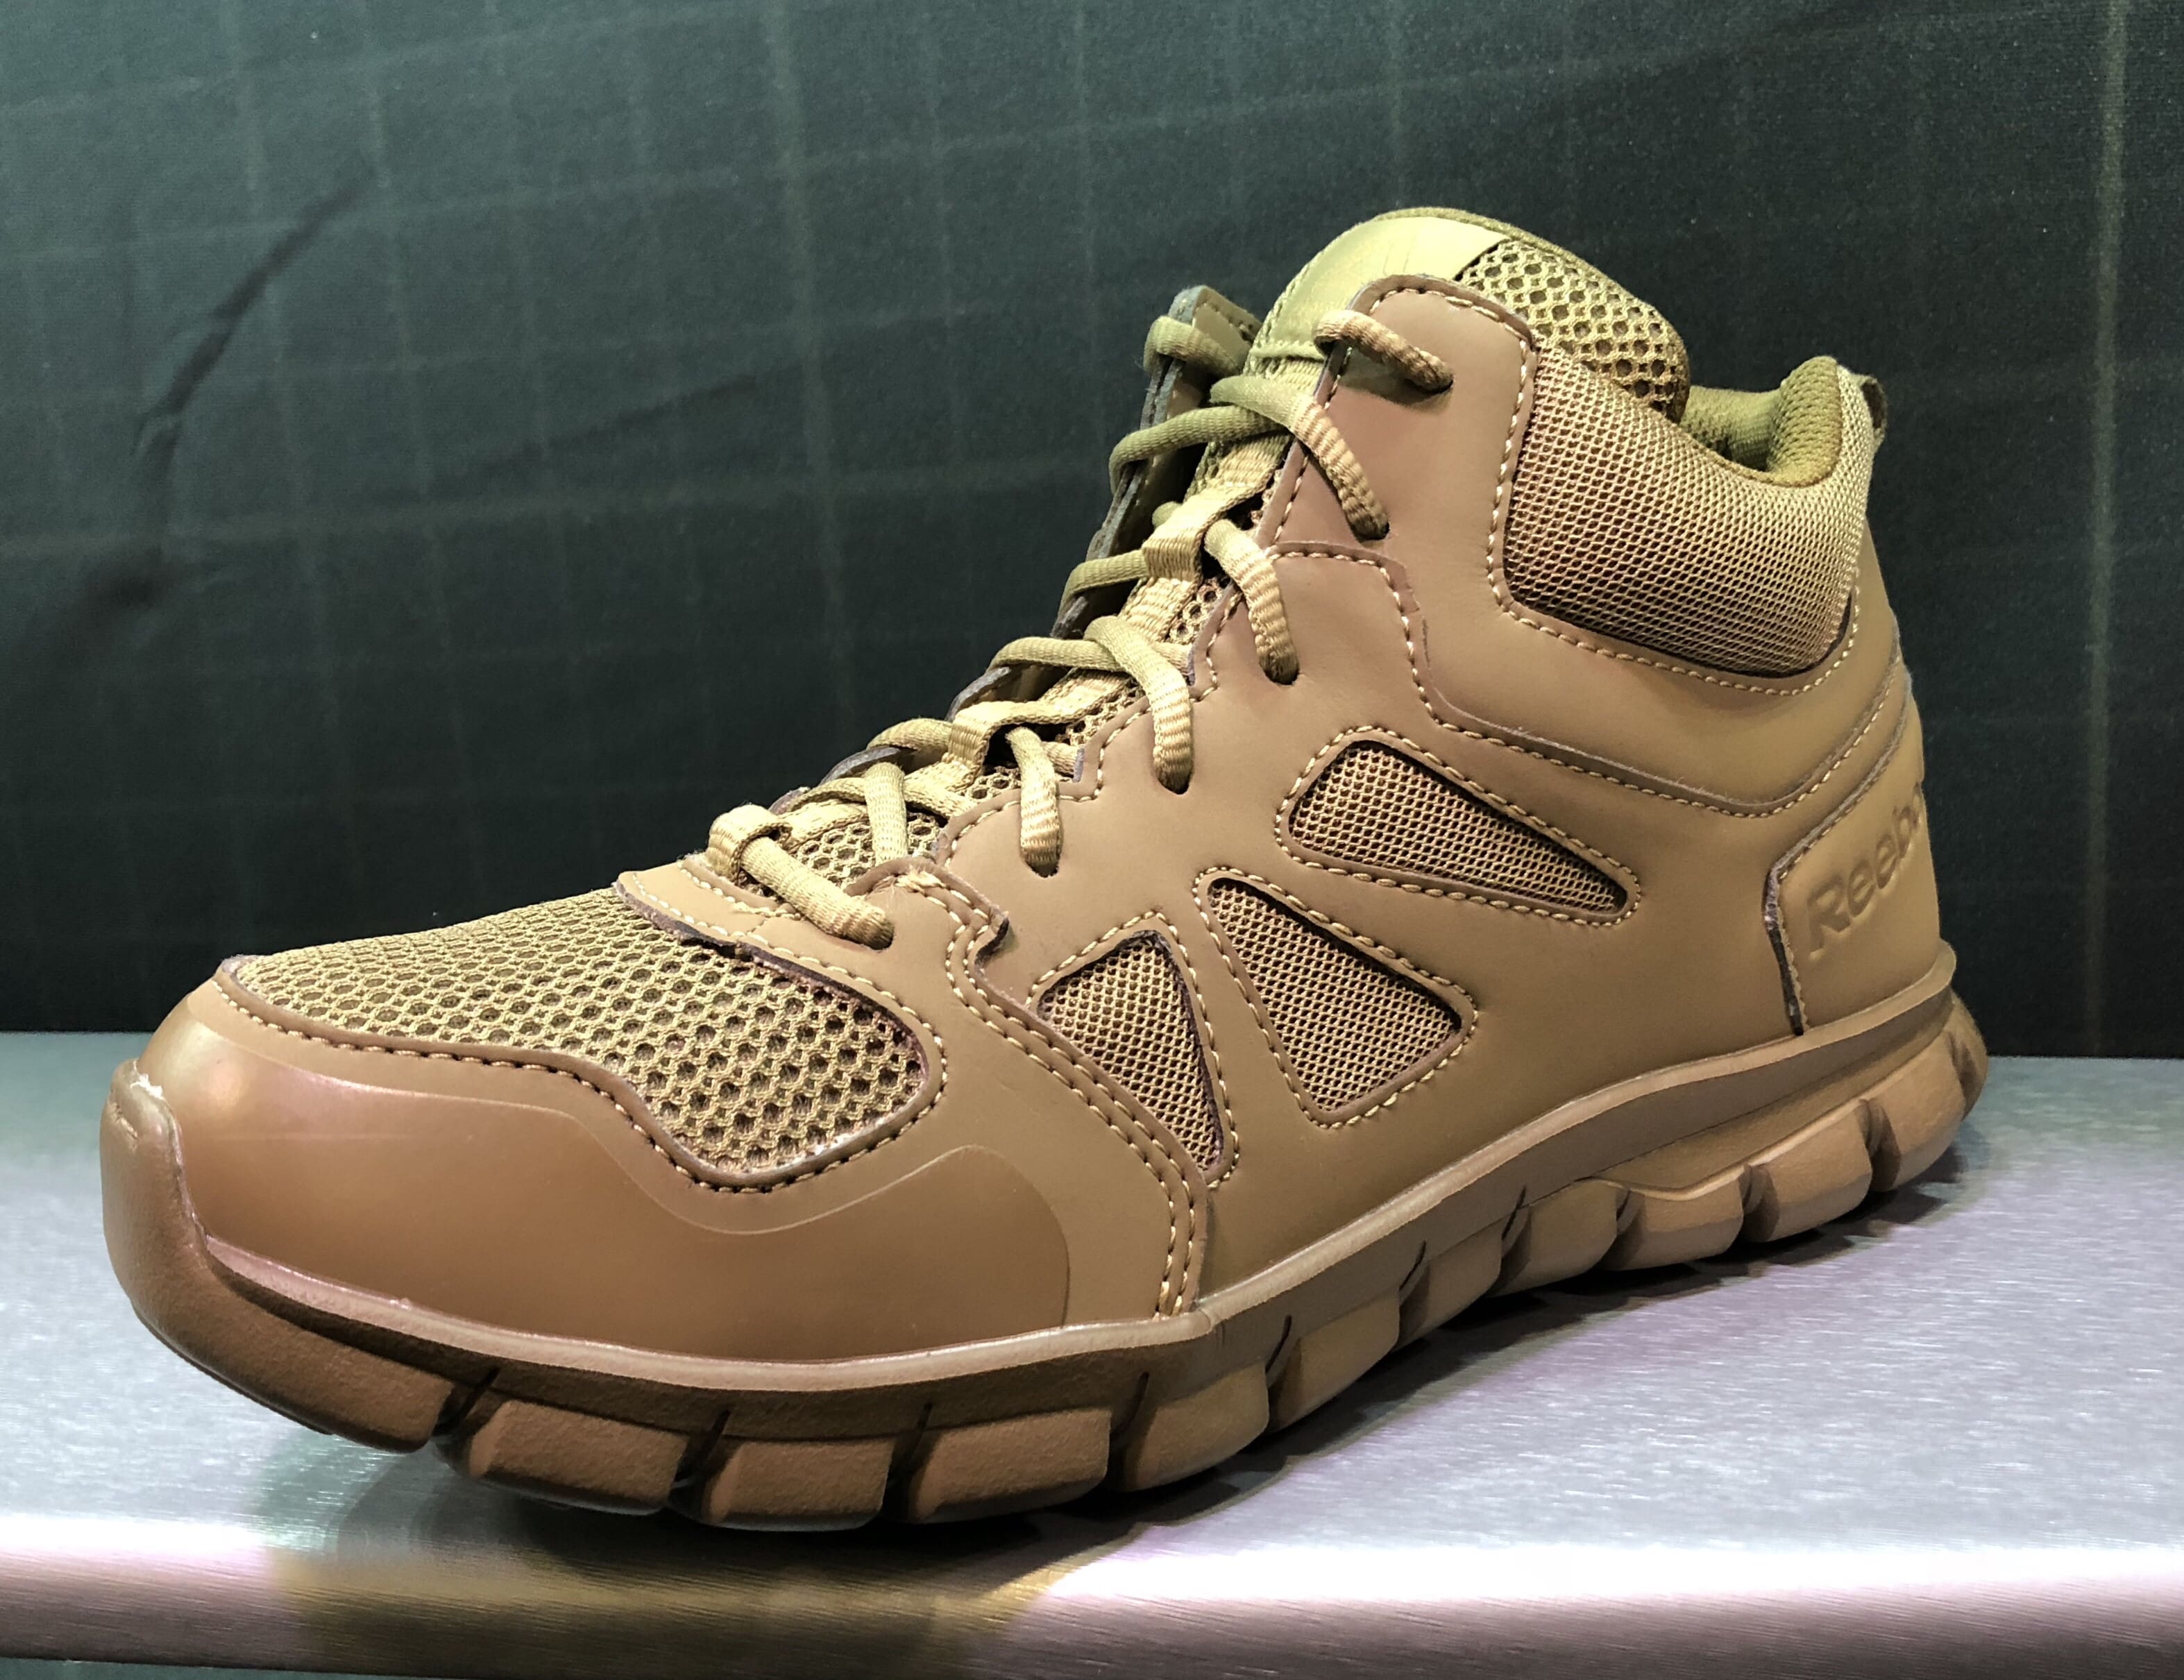 SHOT Show 18 - Reebok Duty Sublite Cushion Tactical Systems Daily